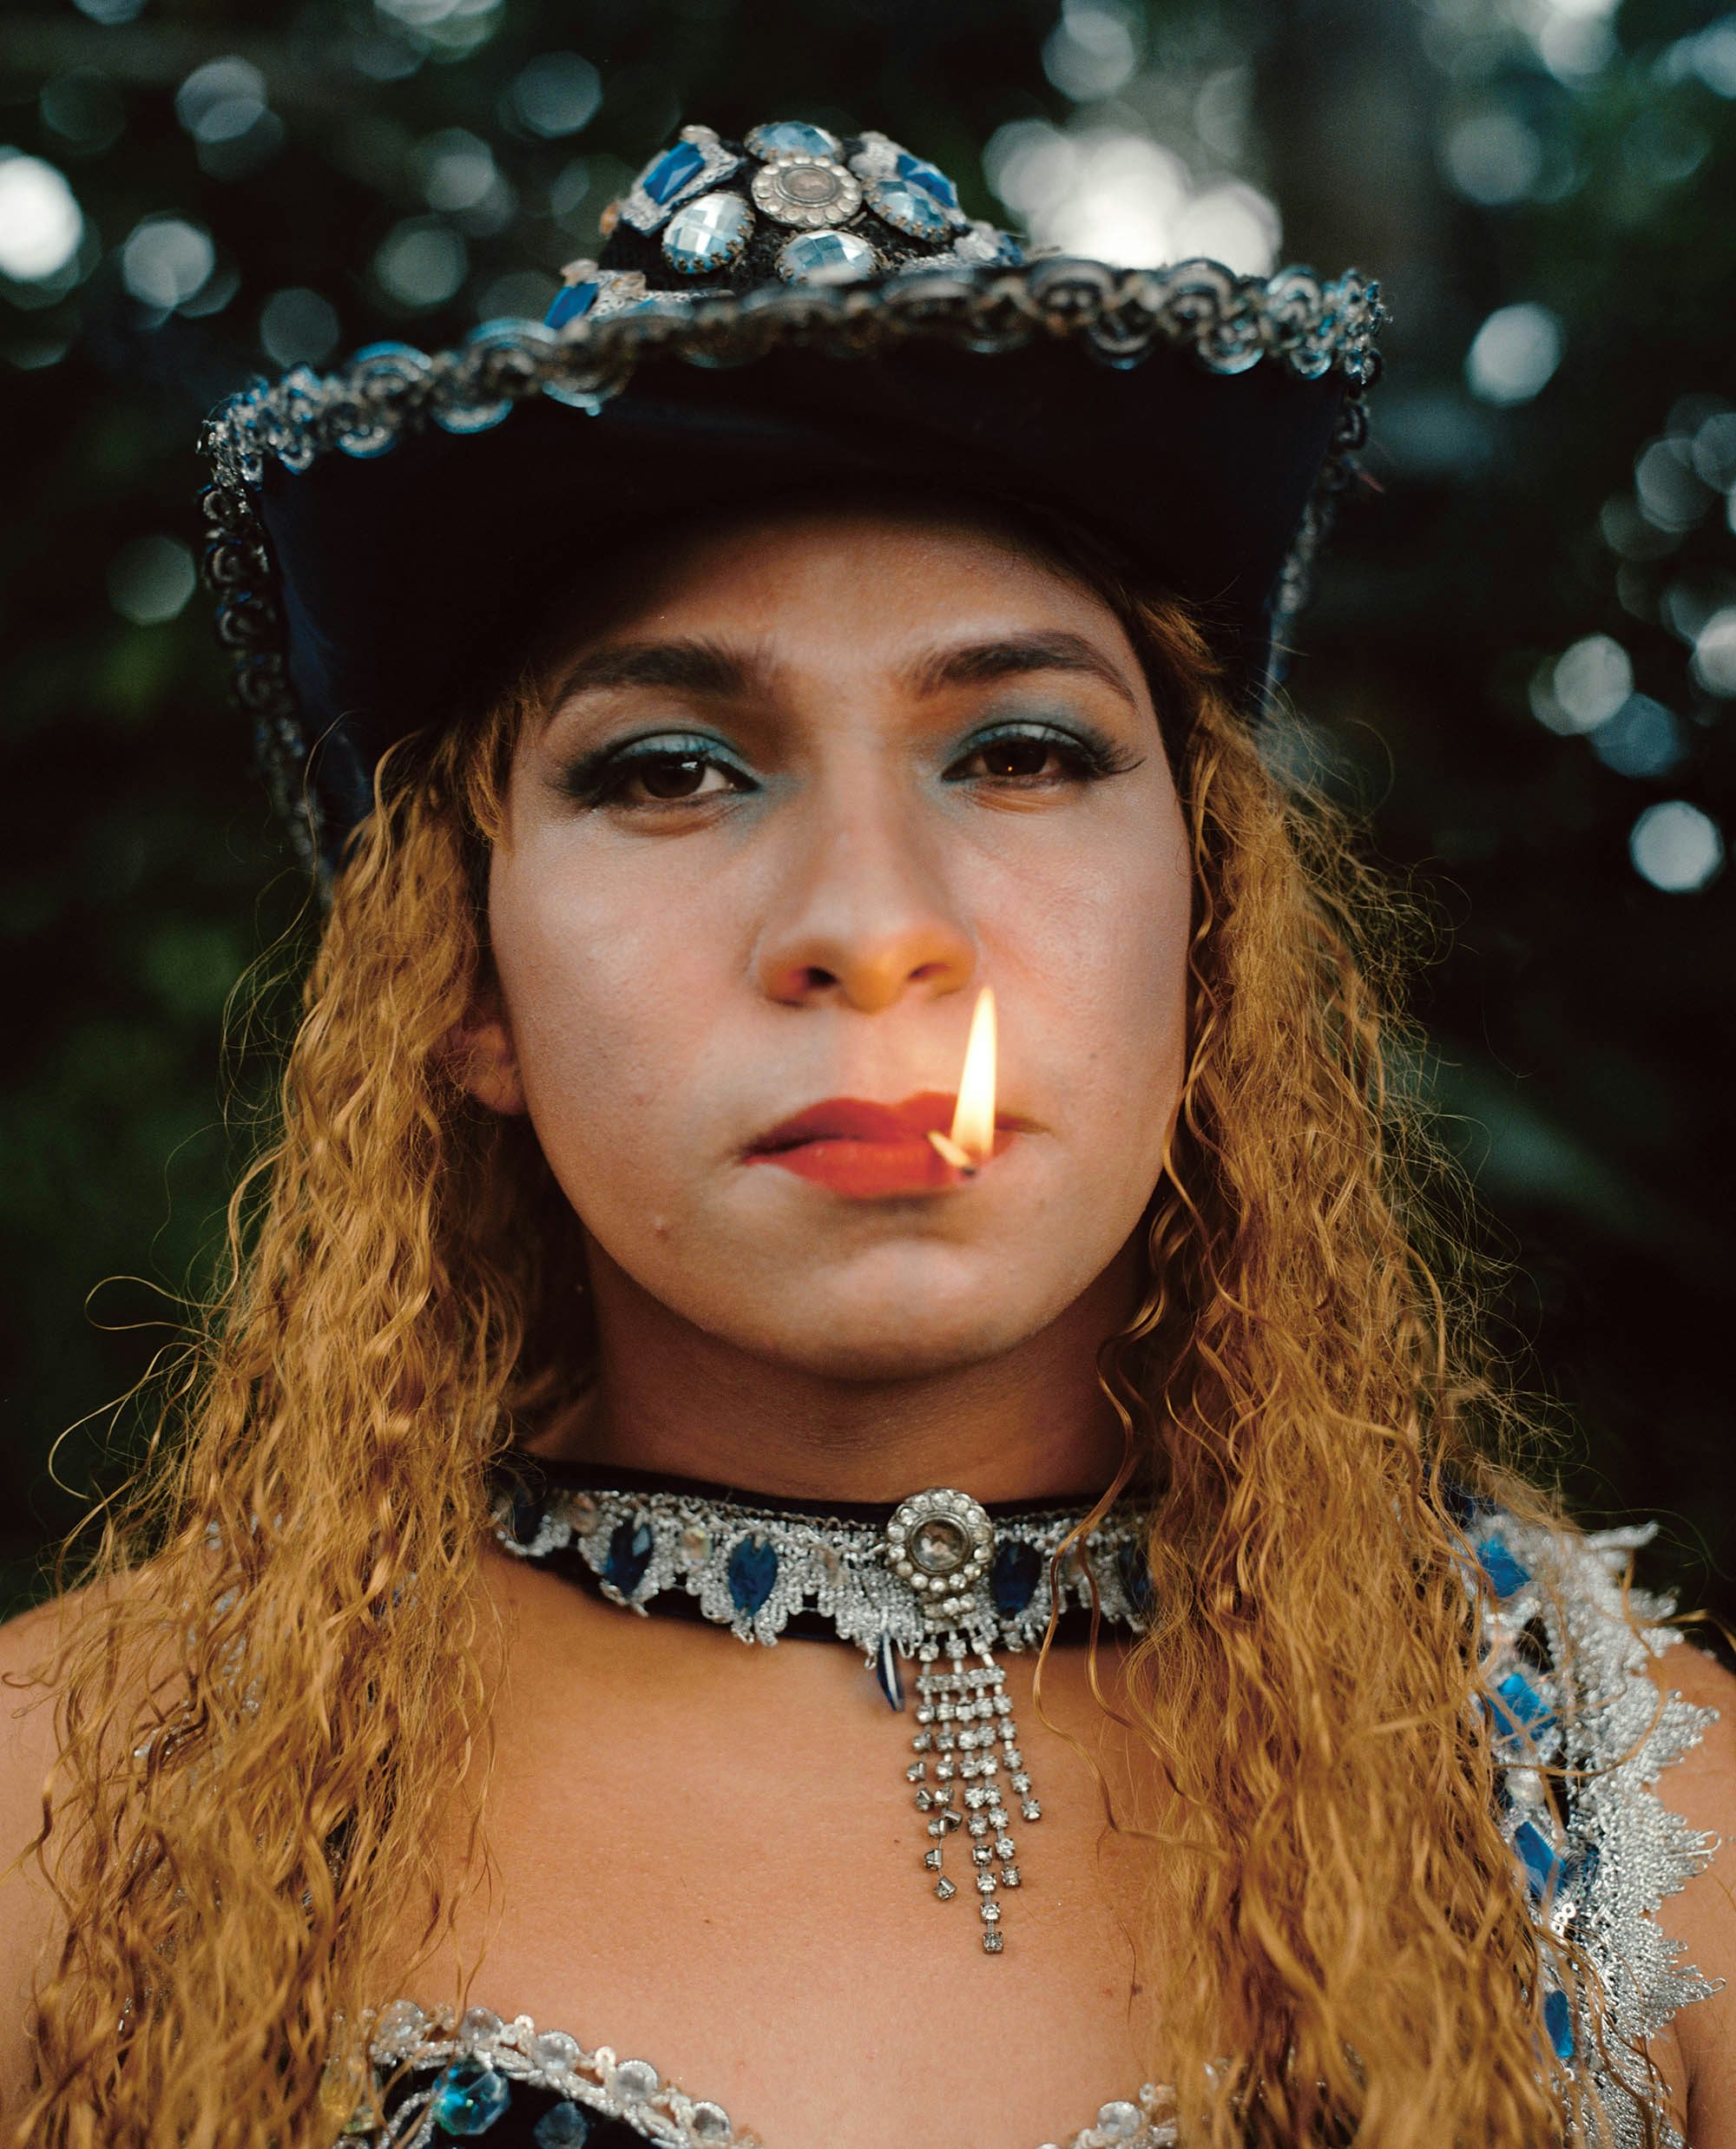 Photograph of a person smoking and wearing a jewelled hat in Like a River by Daniel Jack Lyons